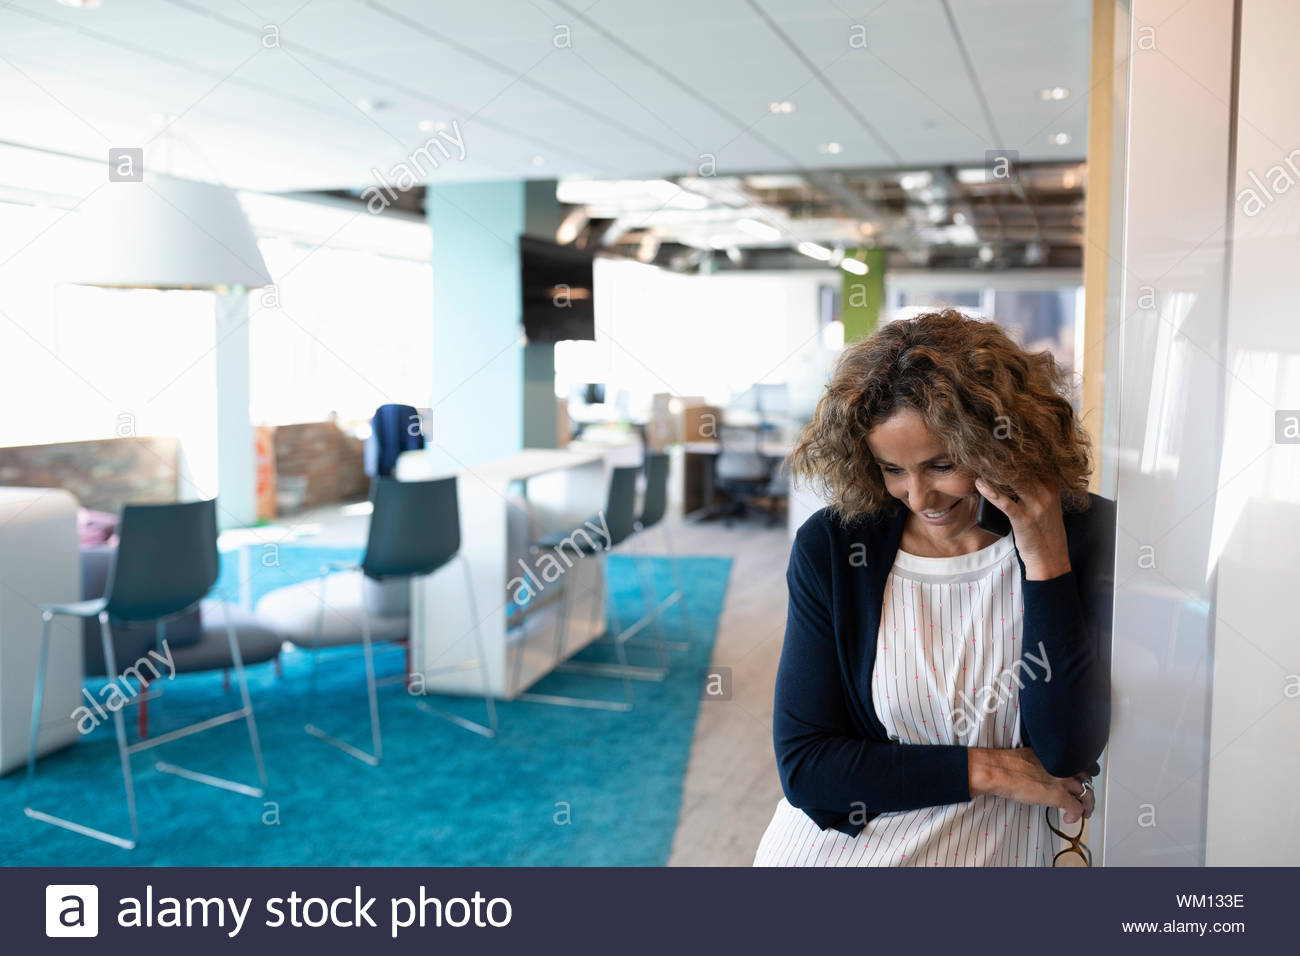 Mature woman on cell phone in open plan office Stock Photo